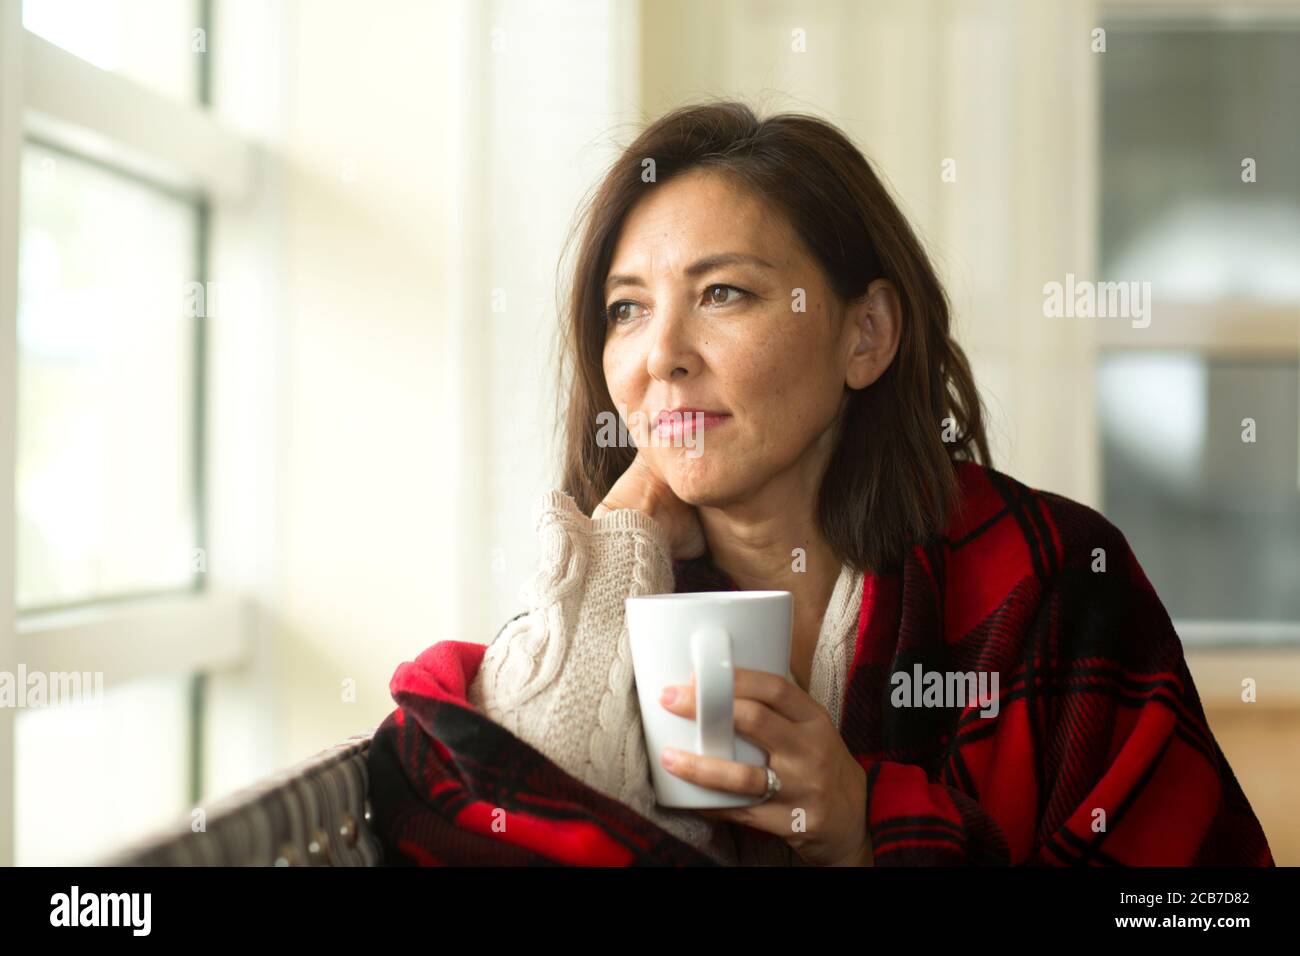 Mature Asian woman enjoying a cup of coffee. Stock Photo